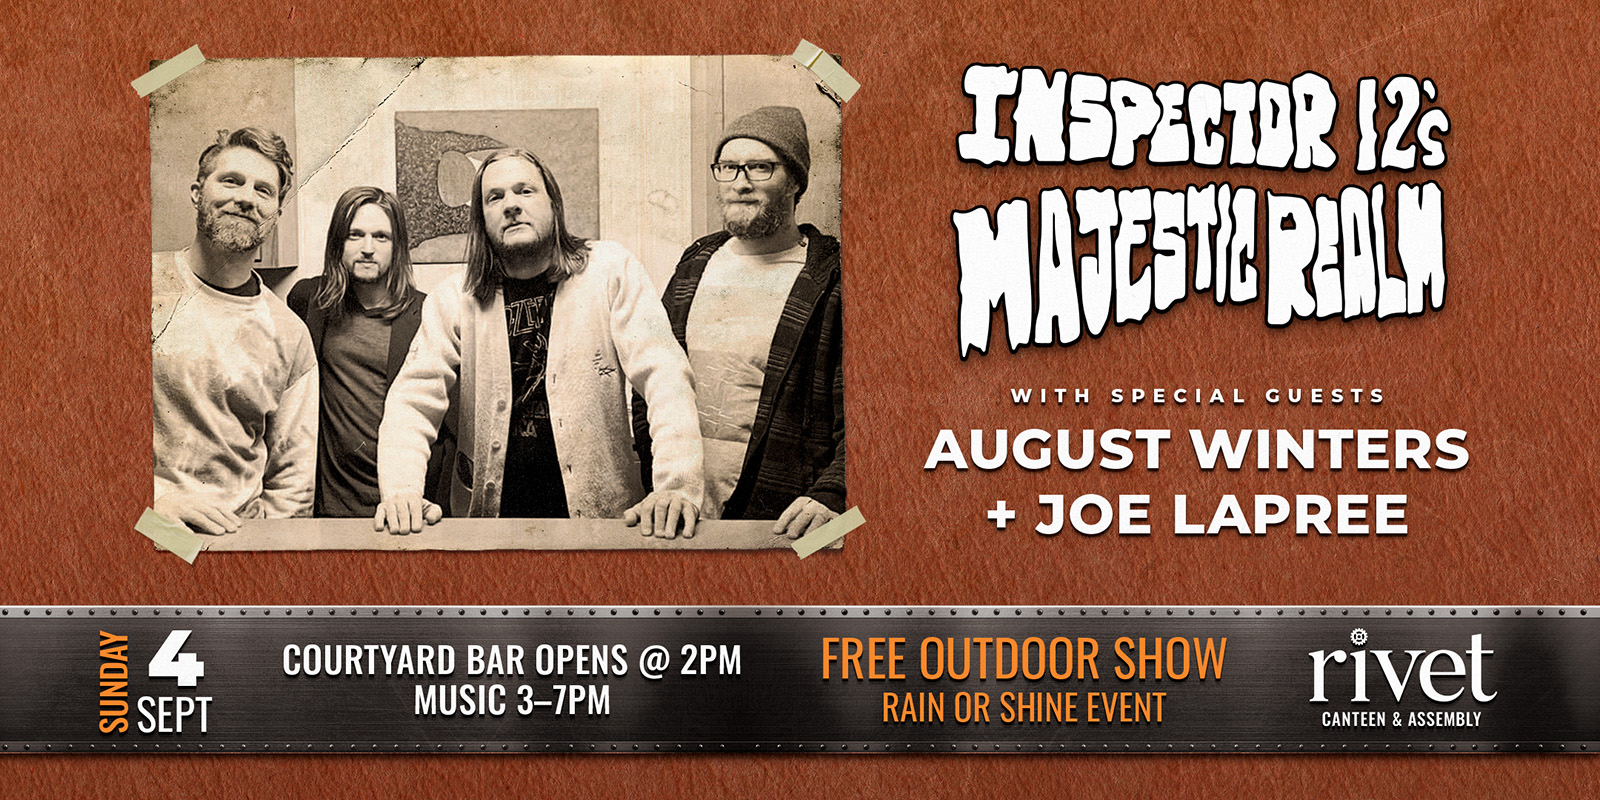 Free outdoor show at Rivet: Canteen & Assembly with Inspector 12’s Majestic Realm, August Winters, and Joe Lapree on Sunday, September 4th, 2022. Rain or shine event!